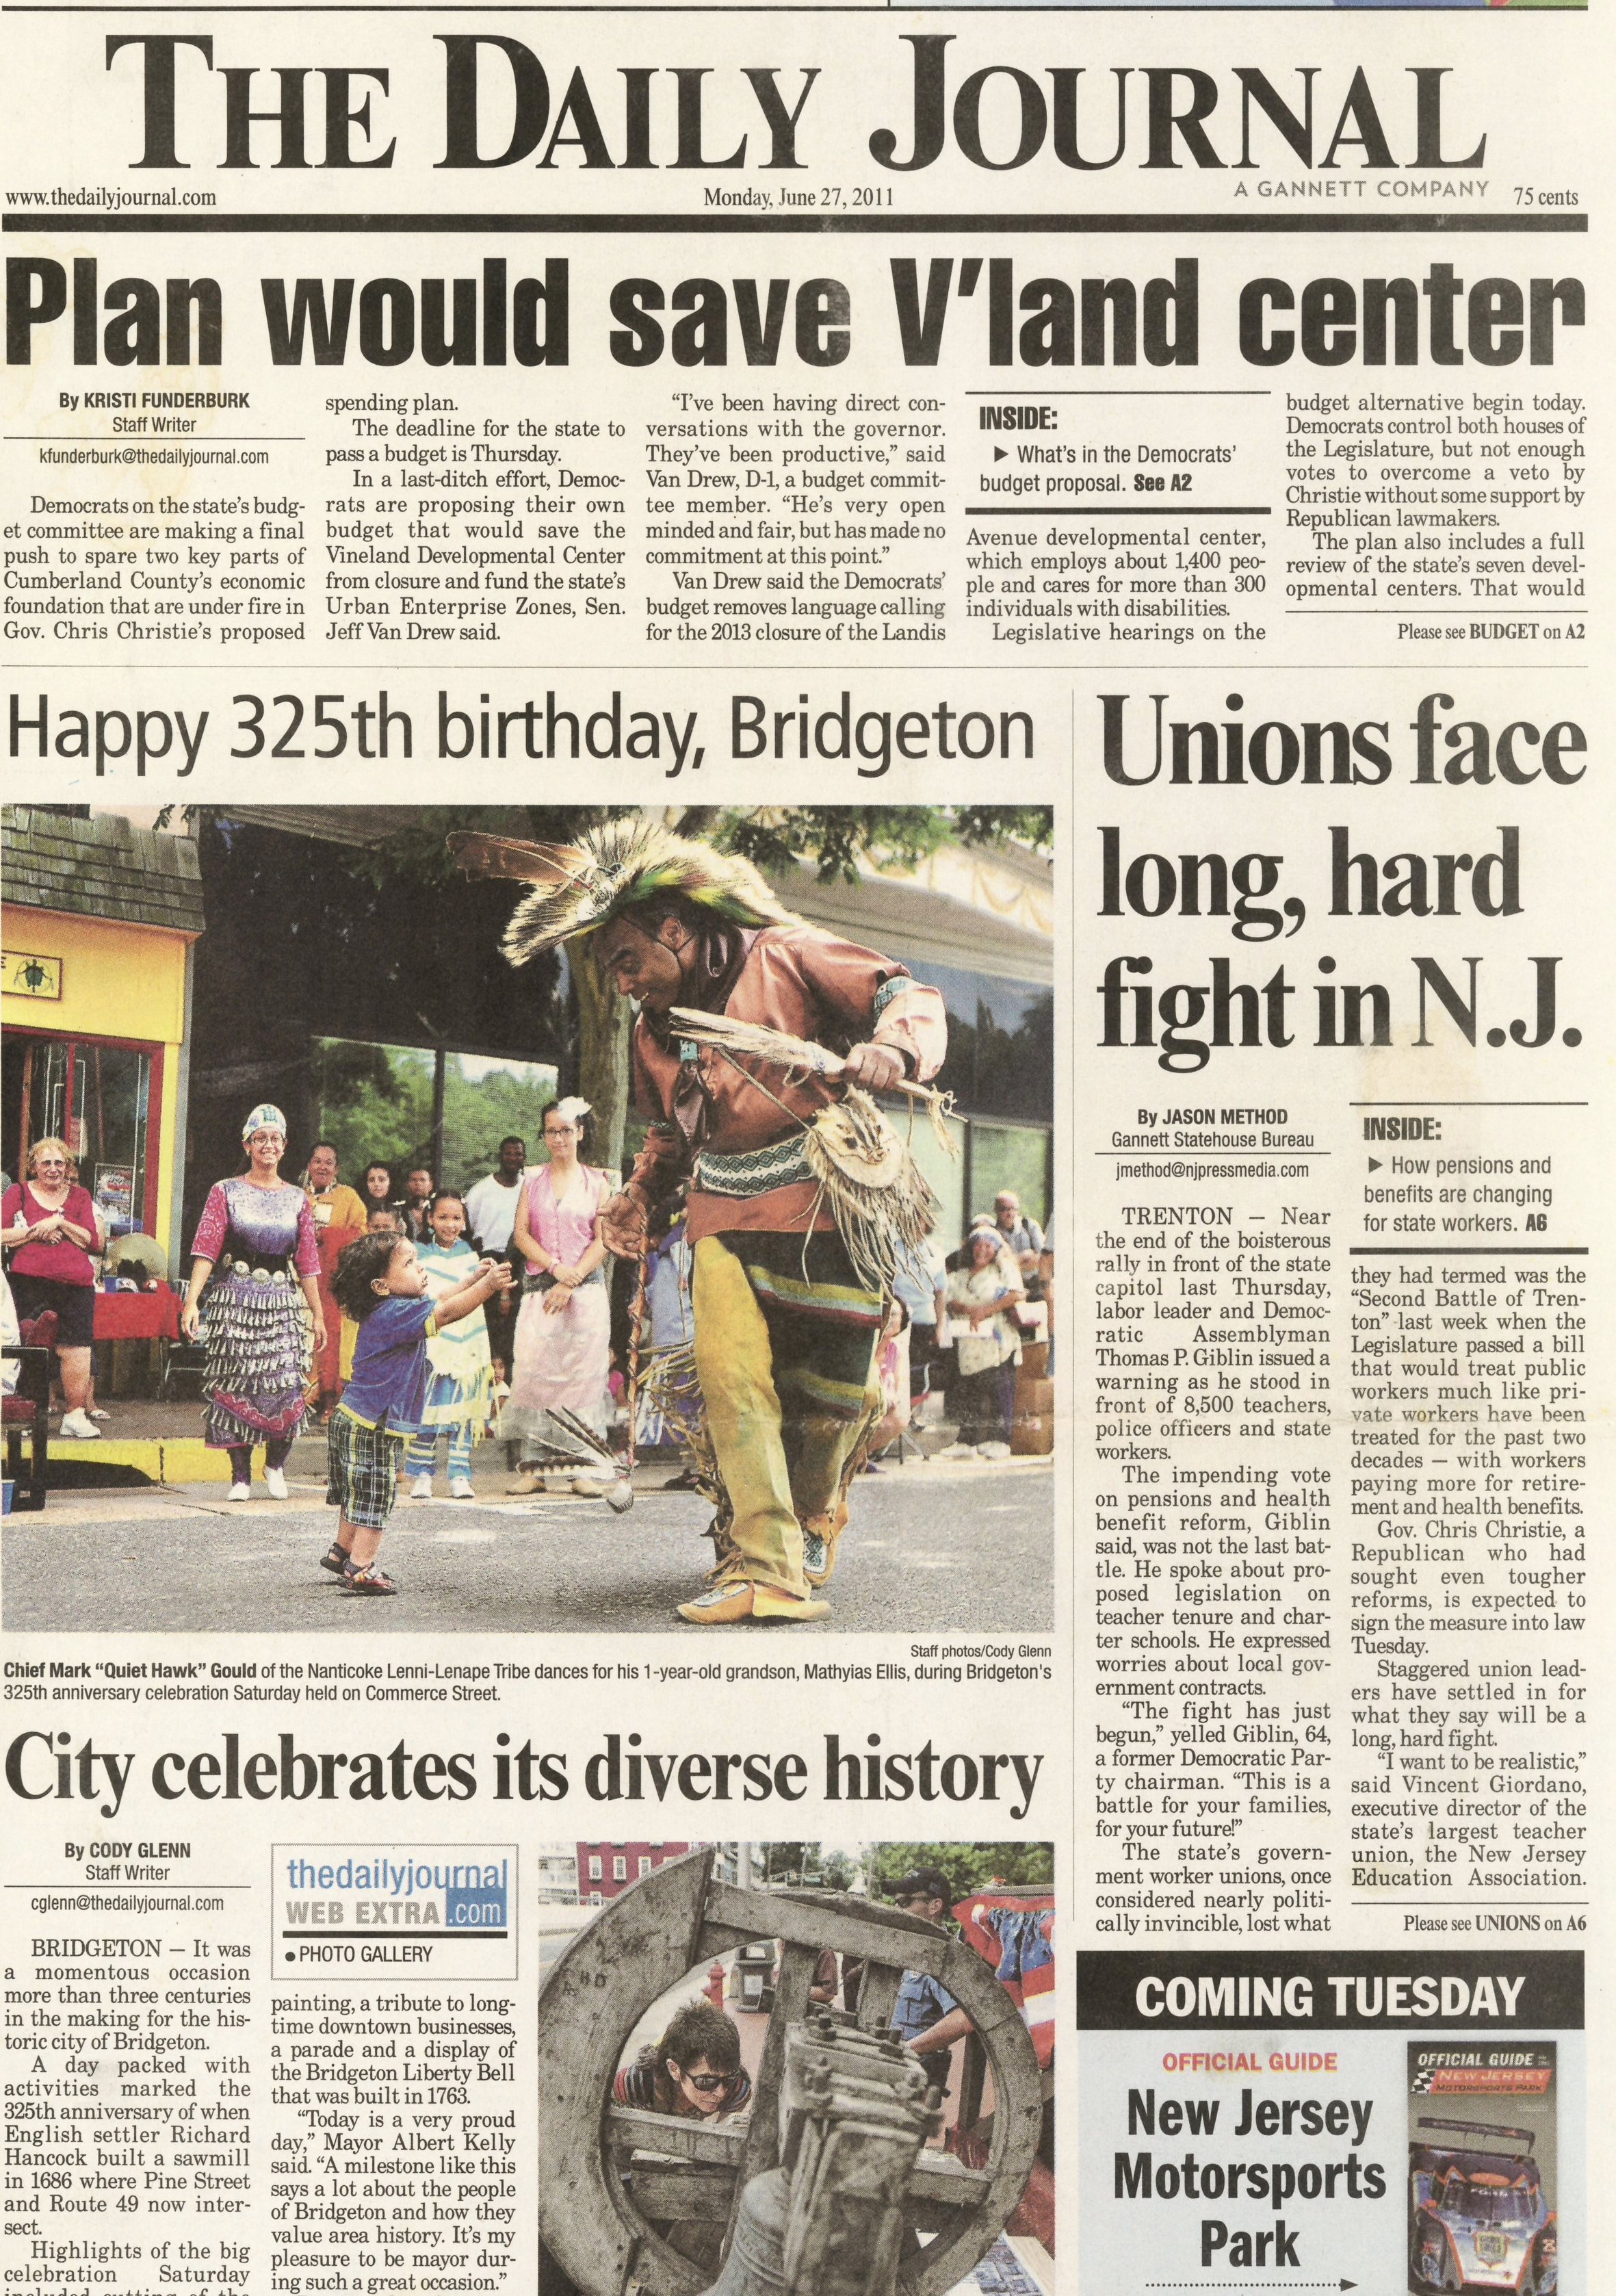  Nanticoke Lenni-Lenape Chief Mark "Quiet Hawk" Gould dances with one-year-old grandson Matthyis in the streets during the City of Bridgeton, New Jersey 325th anniversary celebration June 27 2011 /  The Daily Journal  